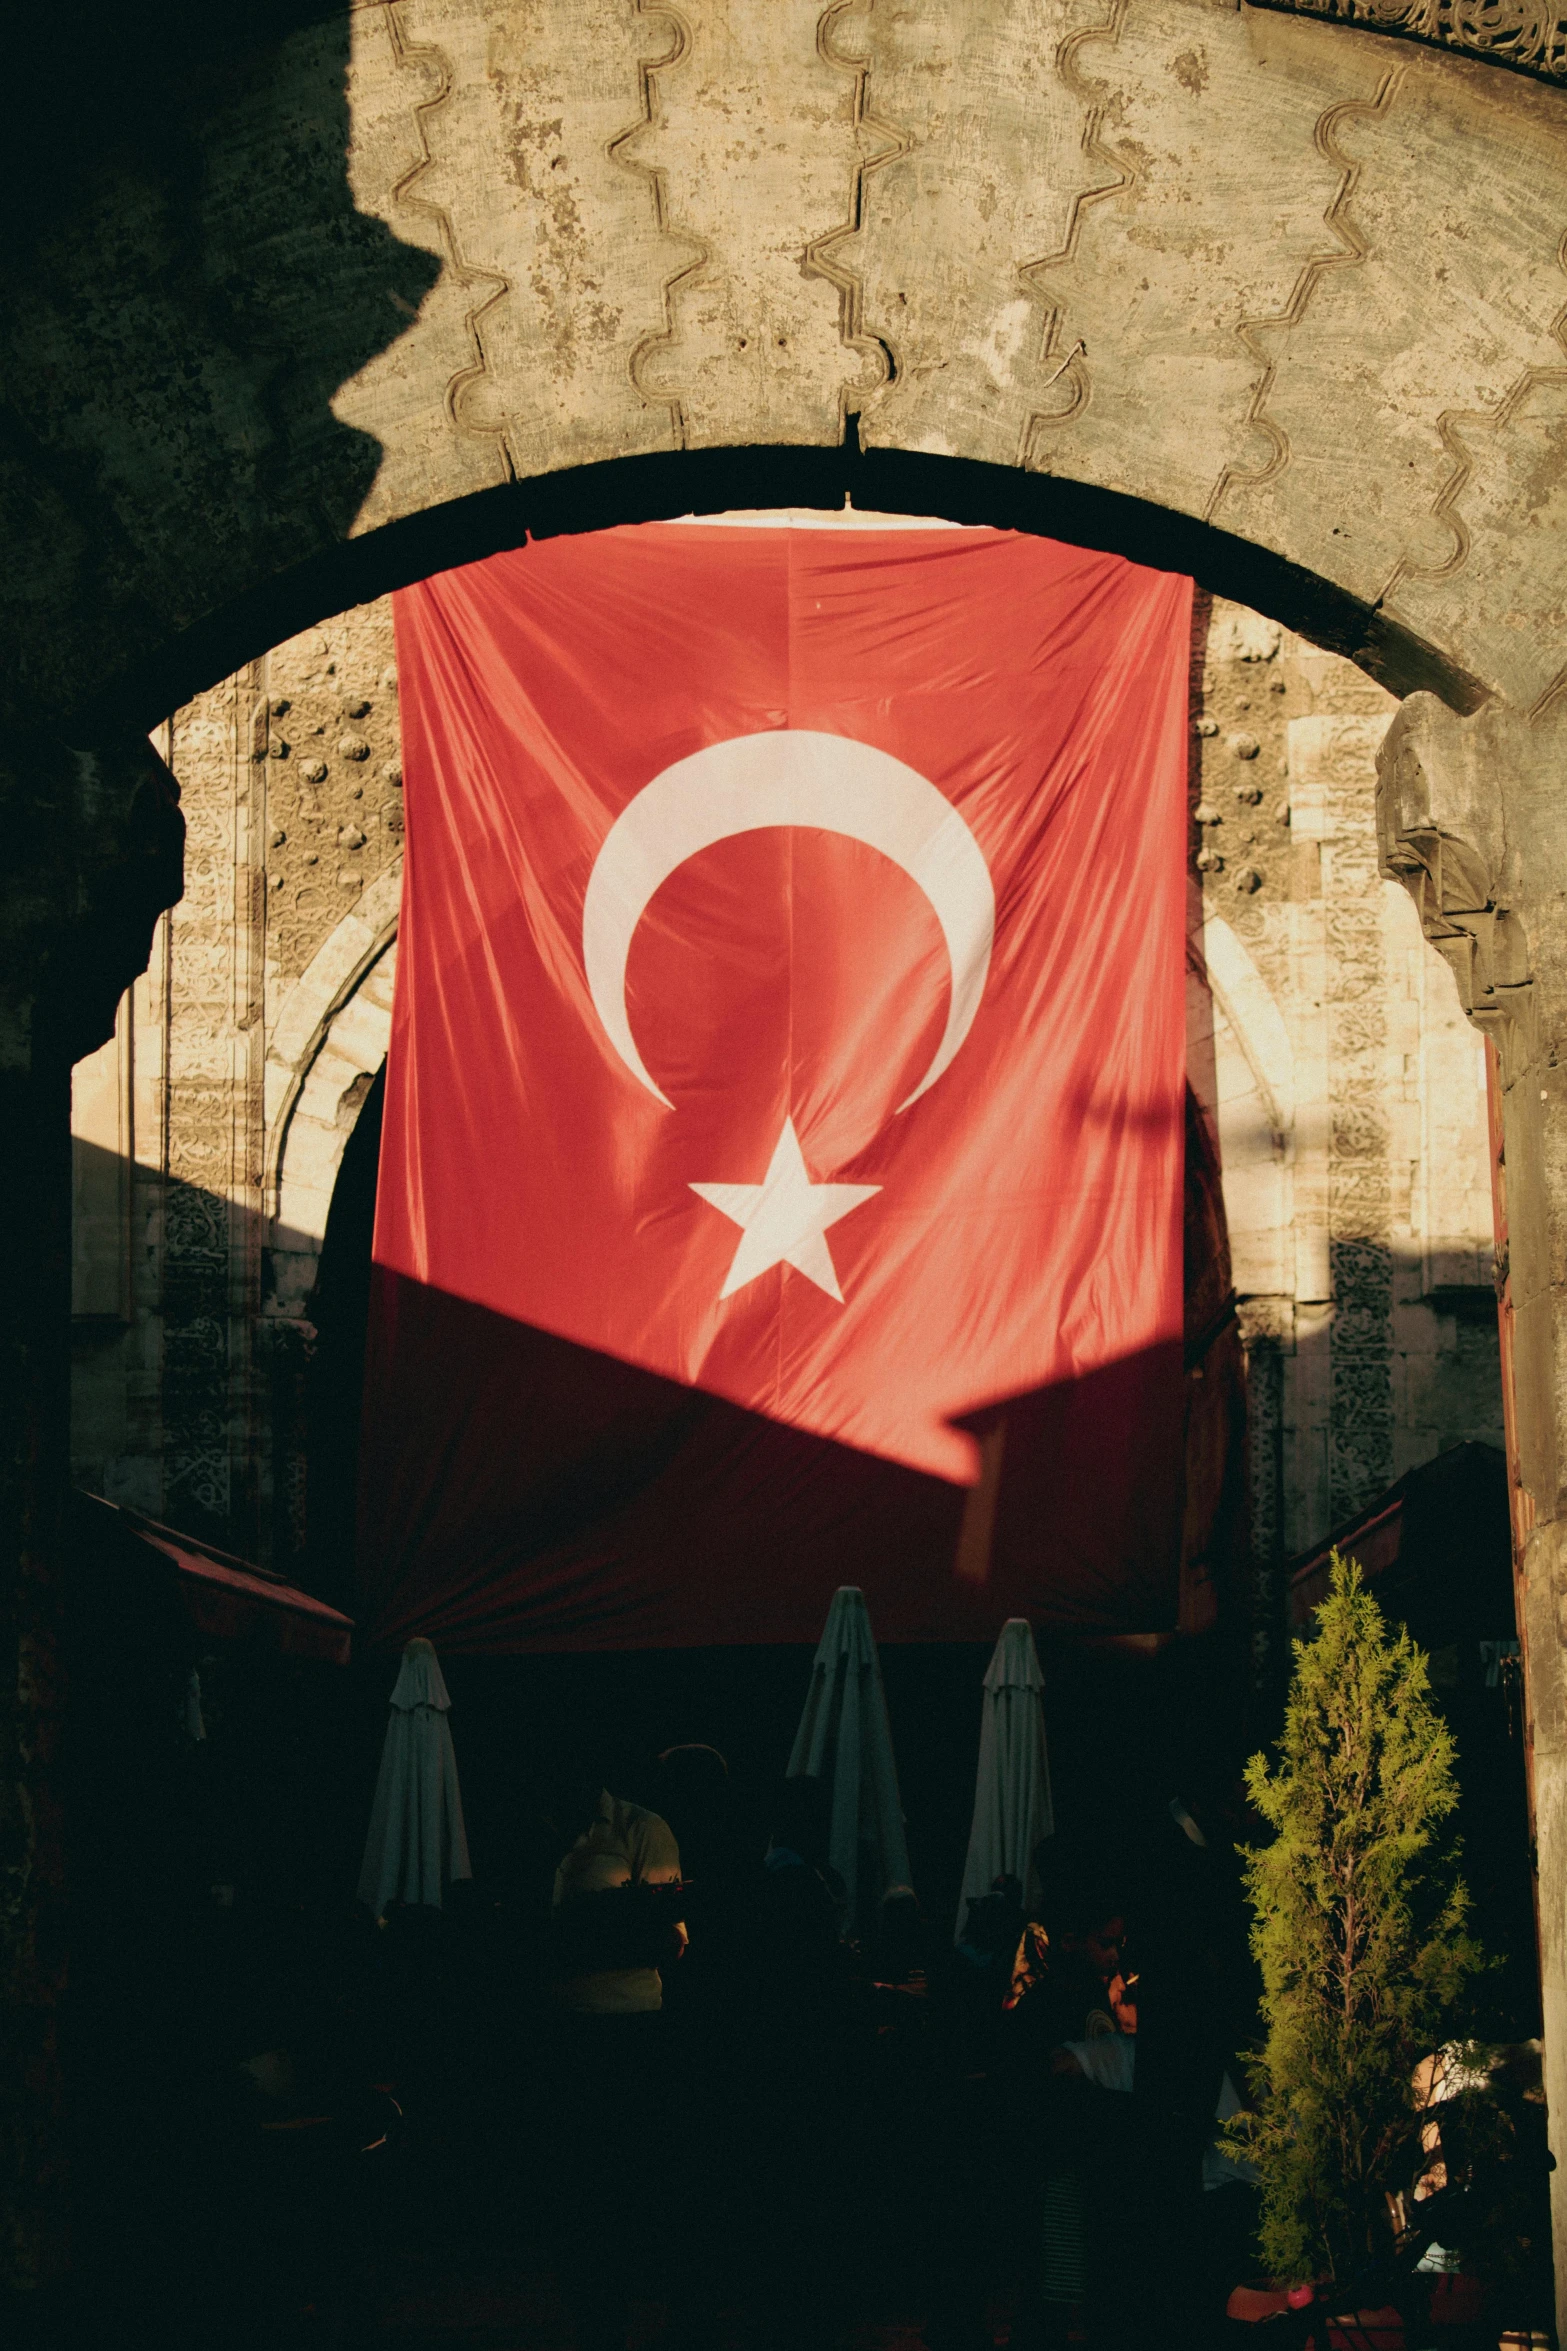 a red flag is on display in an archway